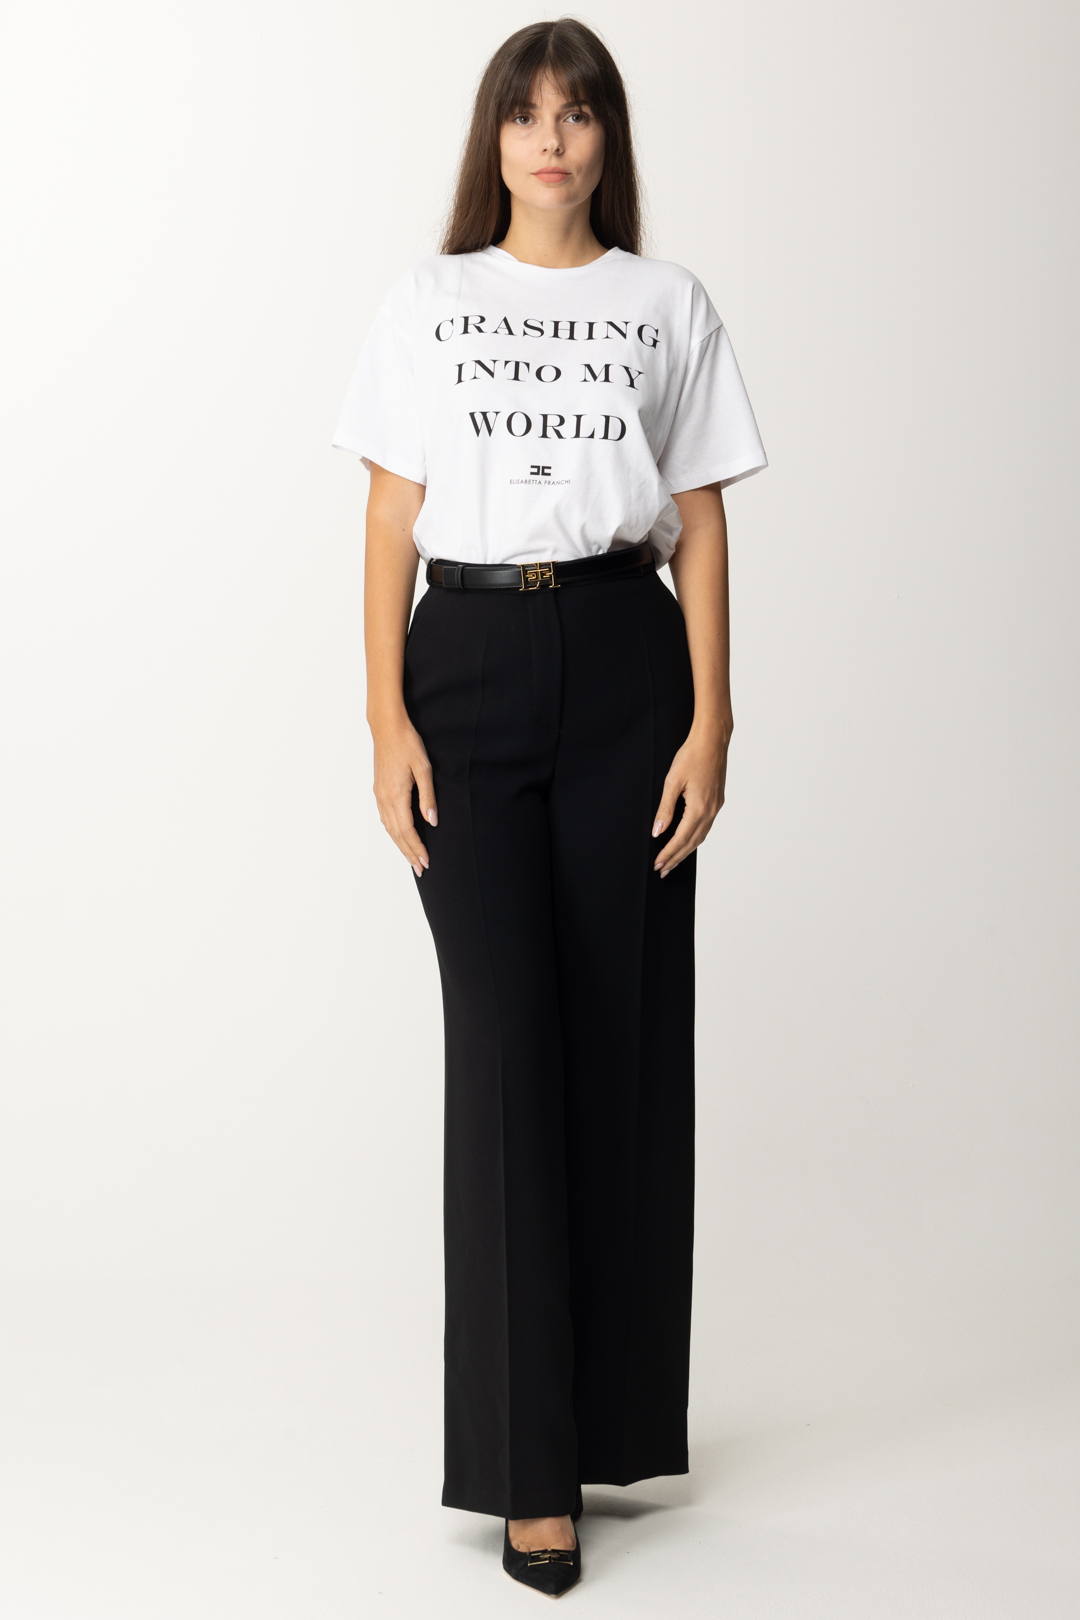 Preview: Elisabetta Franchi T-shirt over with print Gesso